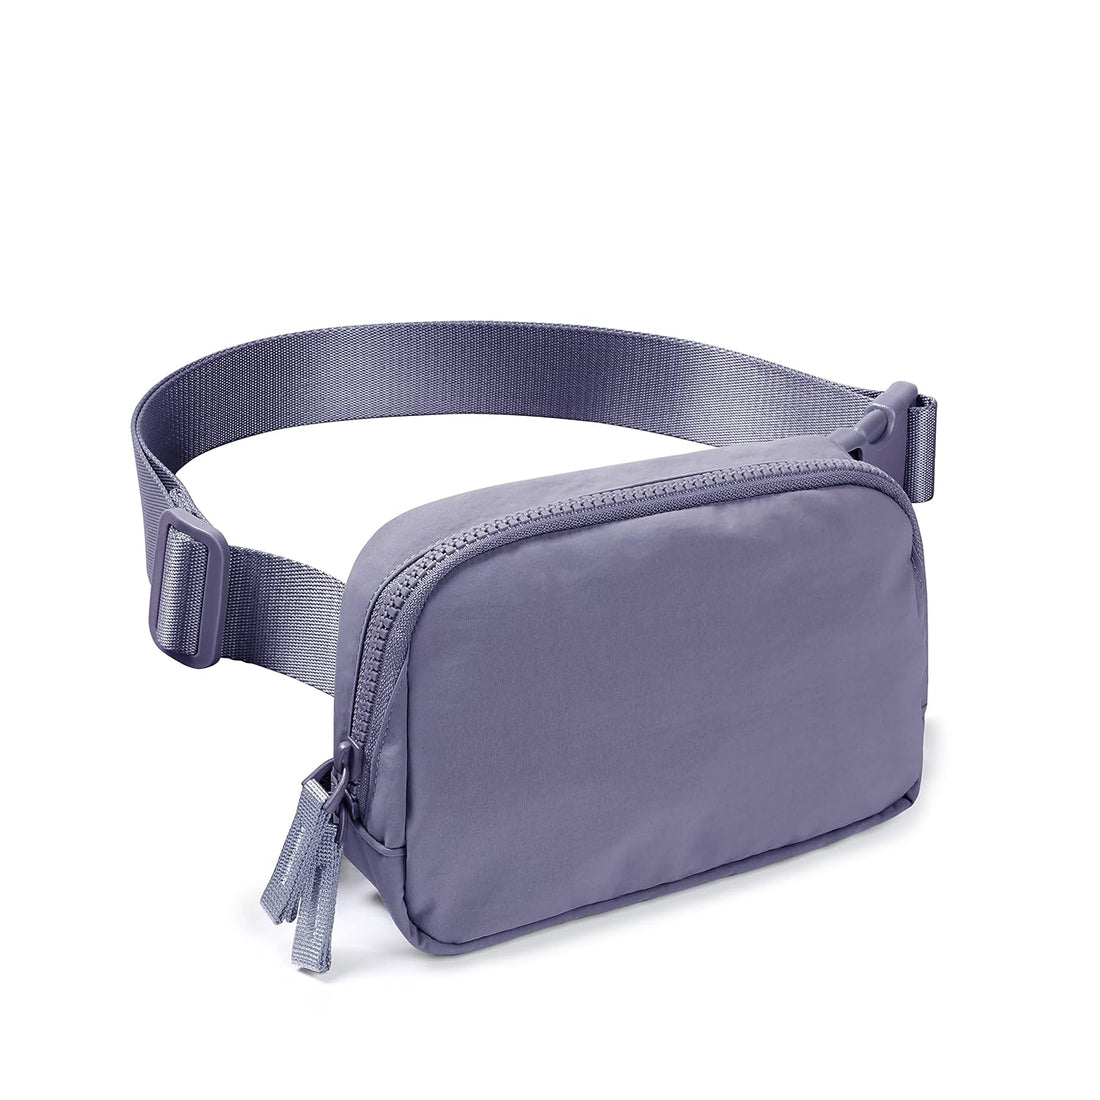 AslabCrew 2-Way Zipper Unisex Belt Bag with Adjustable Strap Fanny Packs Mini Waist Pouch for Outdoor Hiking Running Travel, Ultra Violet